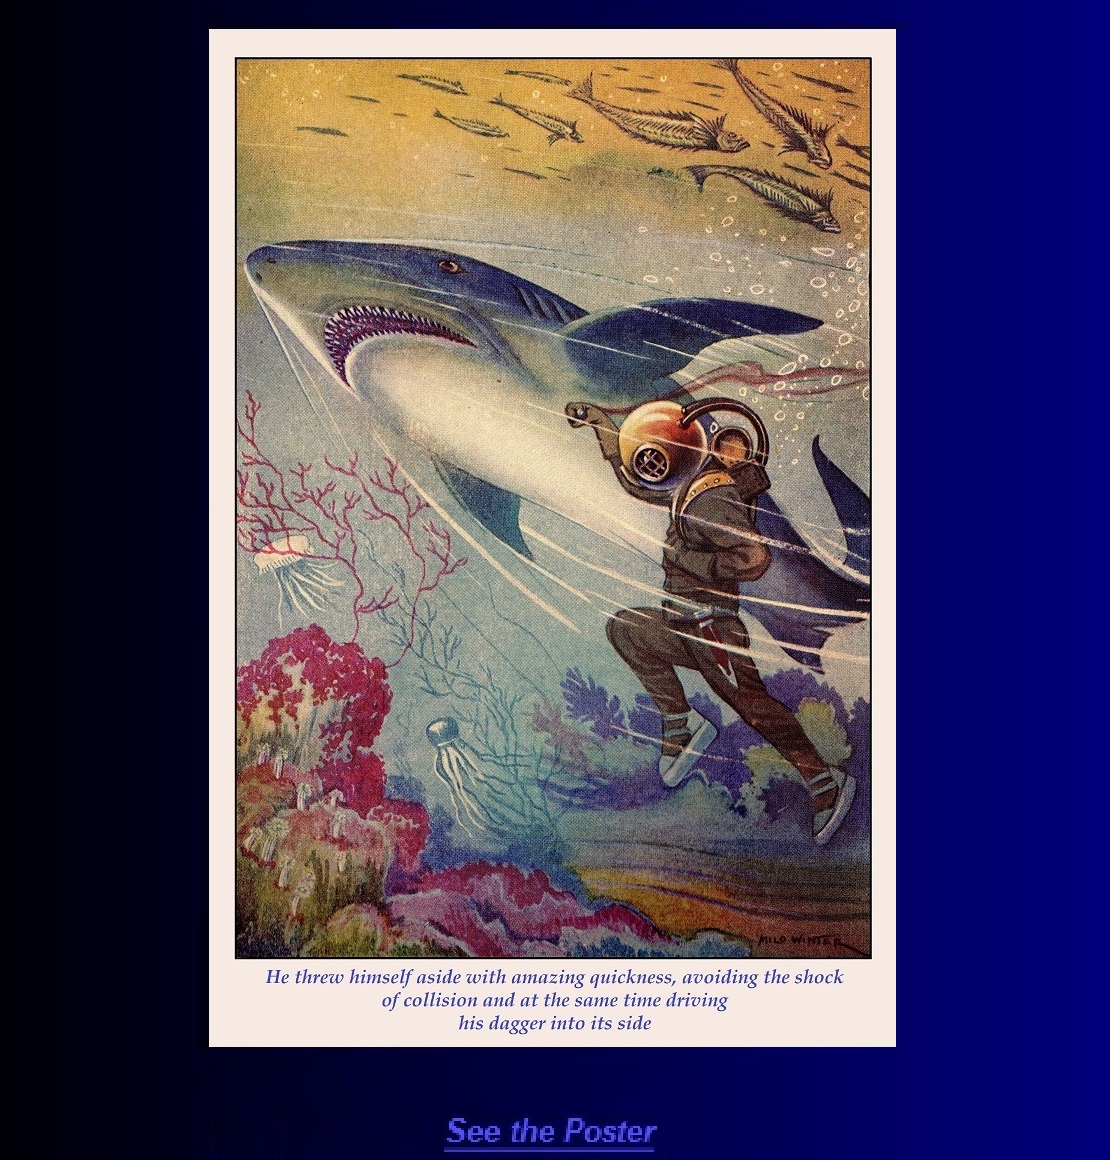 Graphic poster: Captain Nemo plunges his dagger into the shark